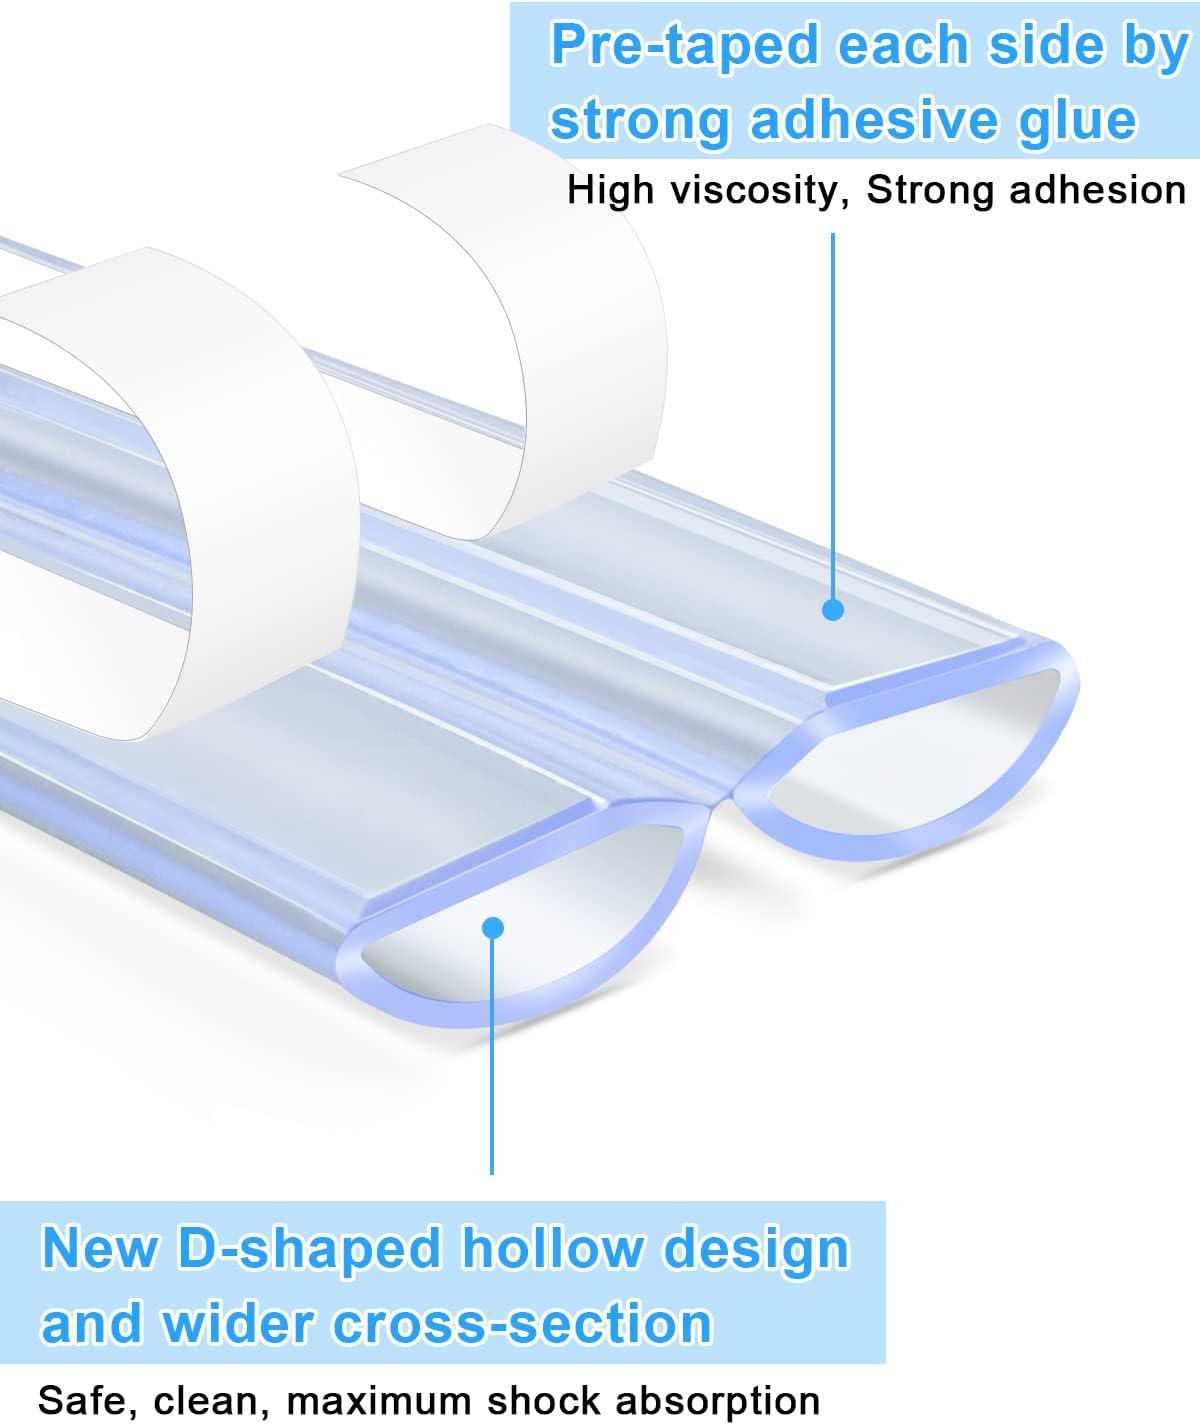 Baby Proofing, 100% Silicone Edge Protector Strip, Soft Corner